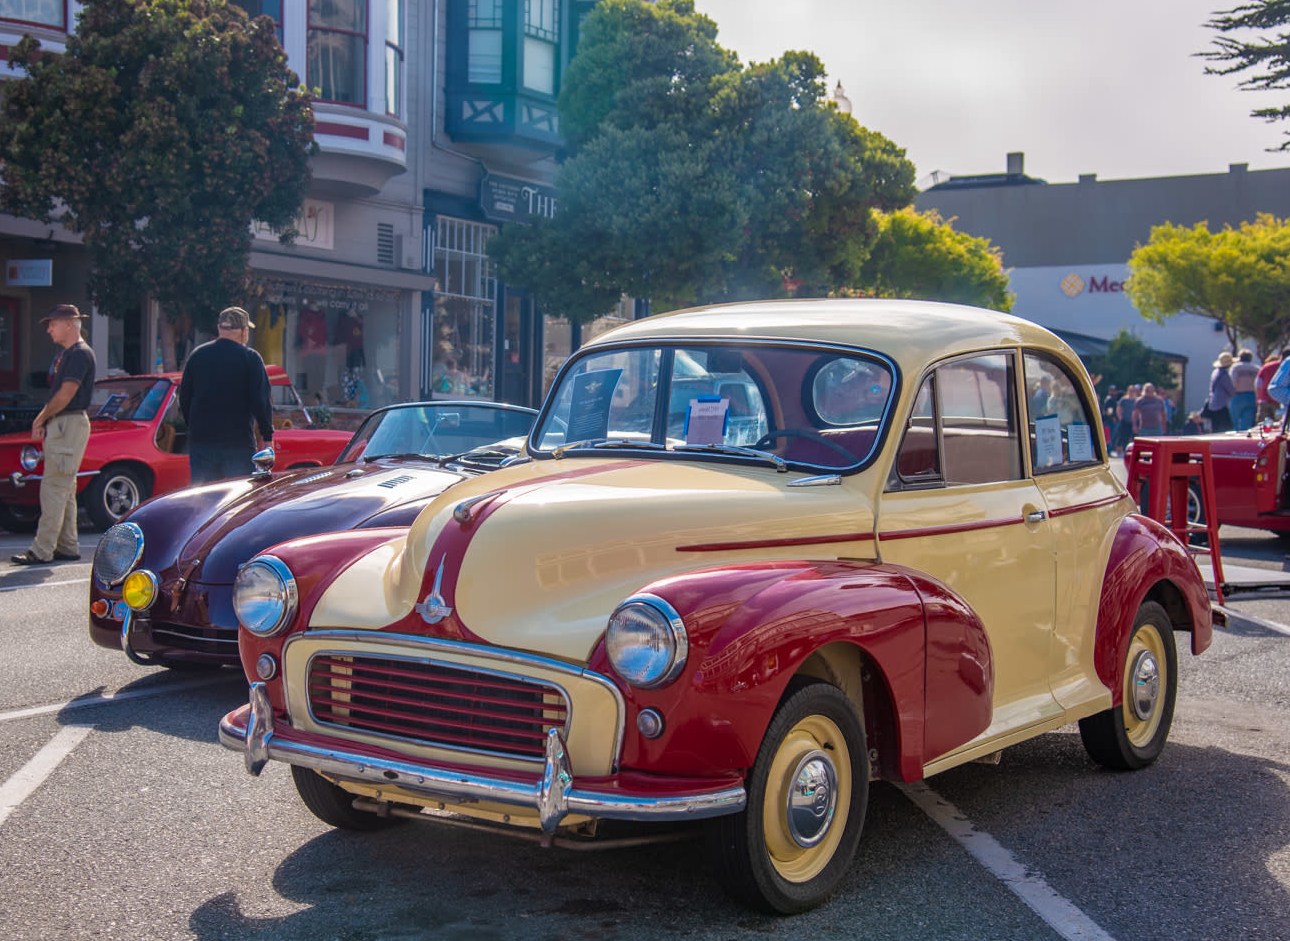 The Little Car Show Pacific Grove Chamber of Commerce